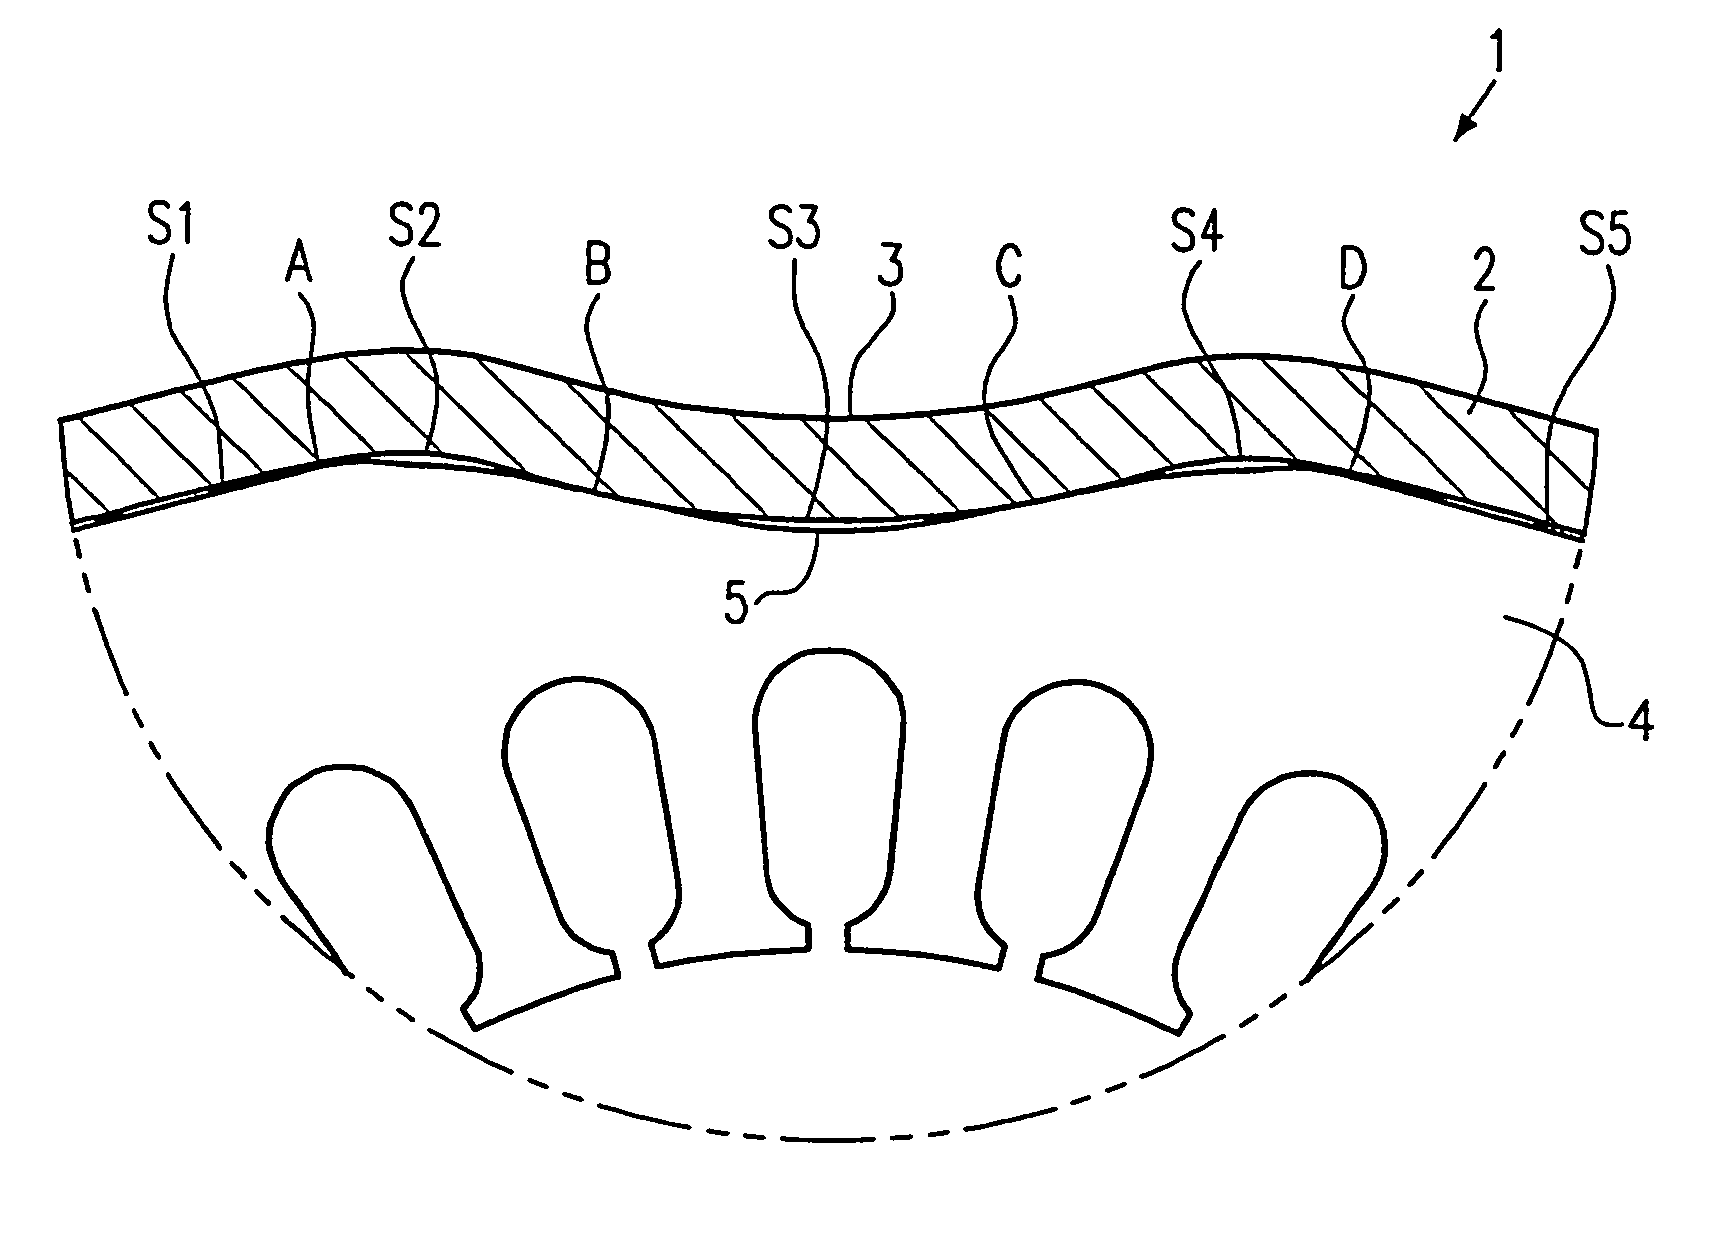 Stator assembly for an electrical machine